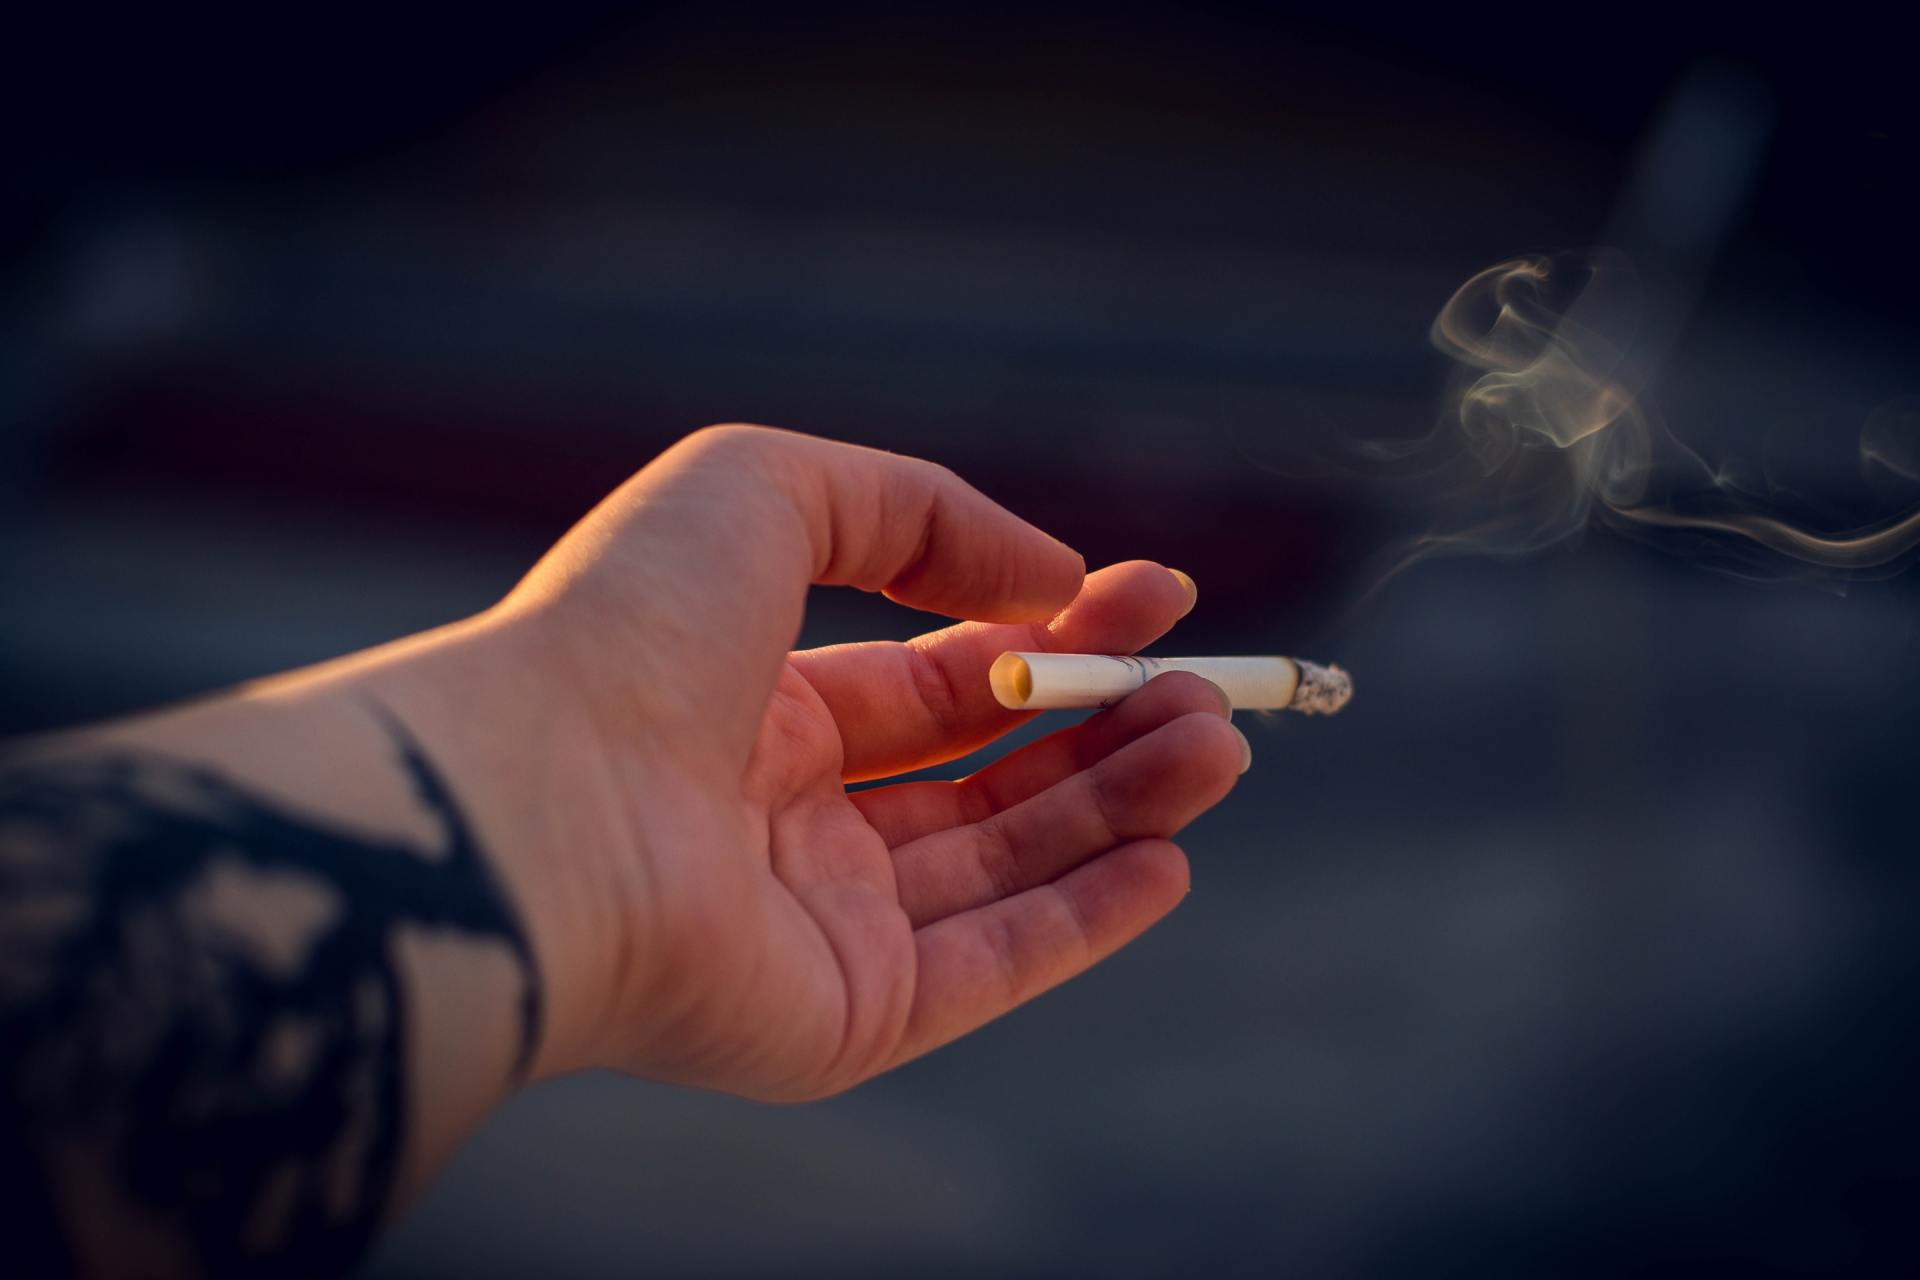 Smoking cigarettes can increase your chances of getting neuropathy.